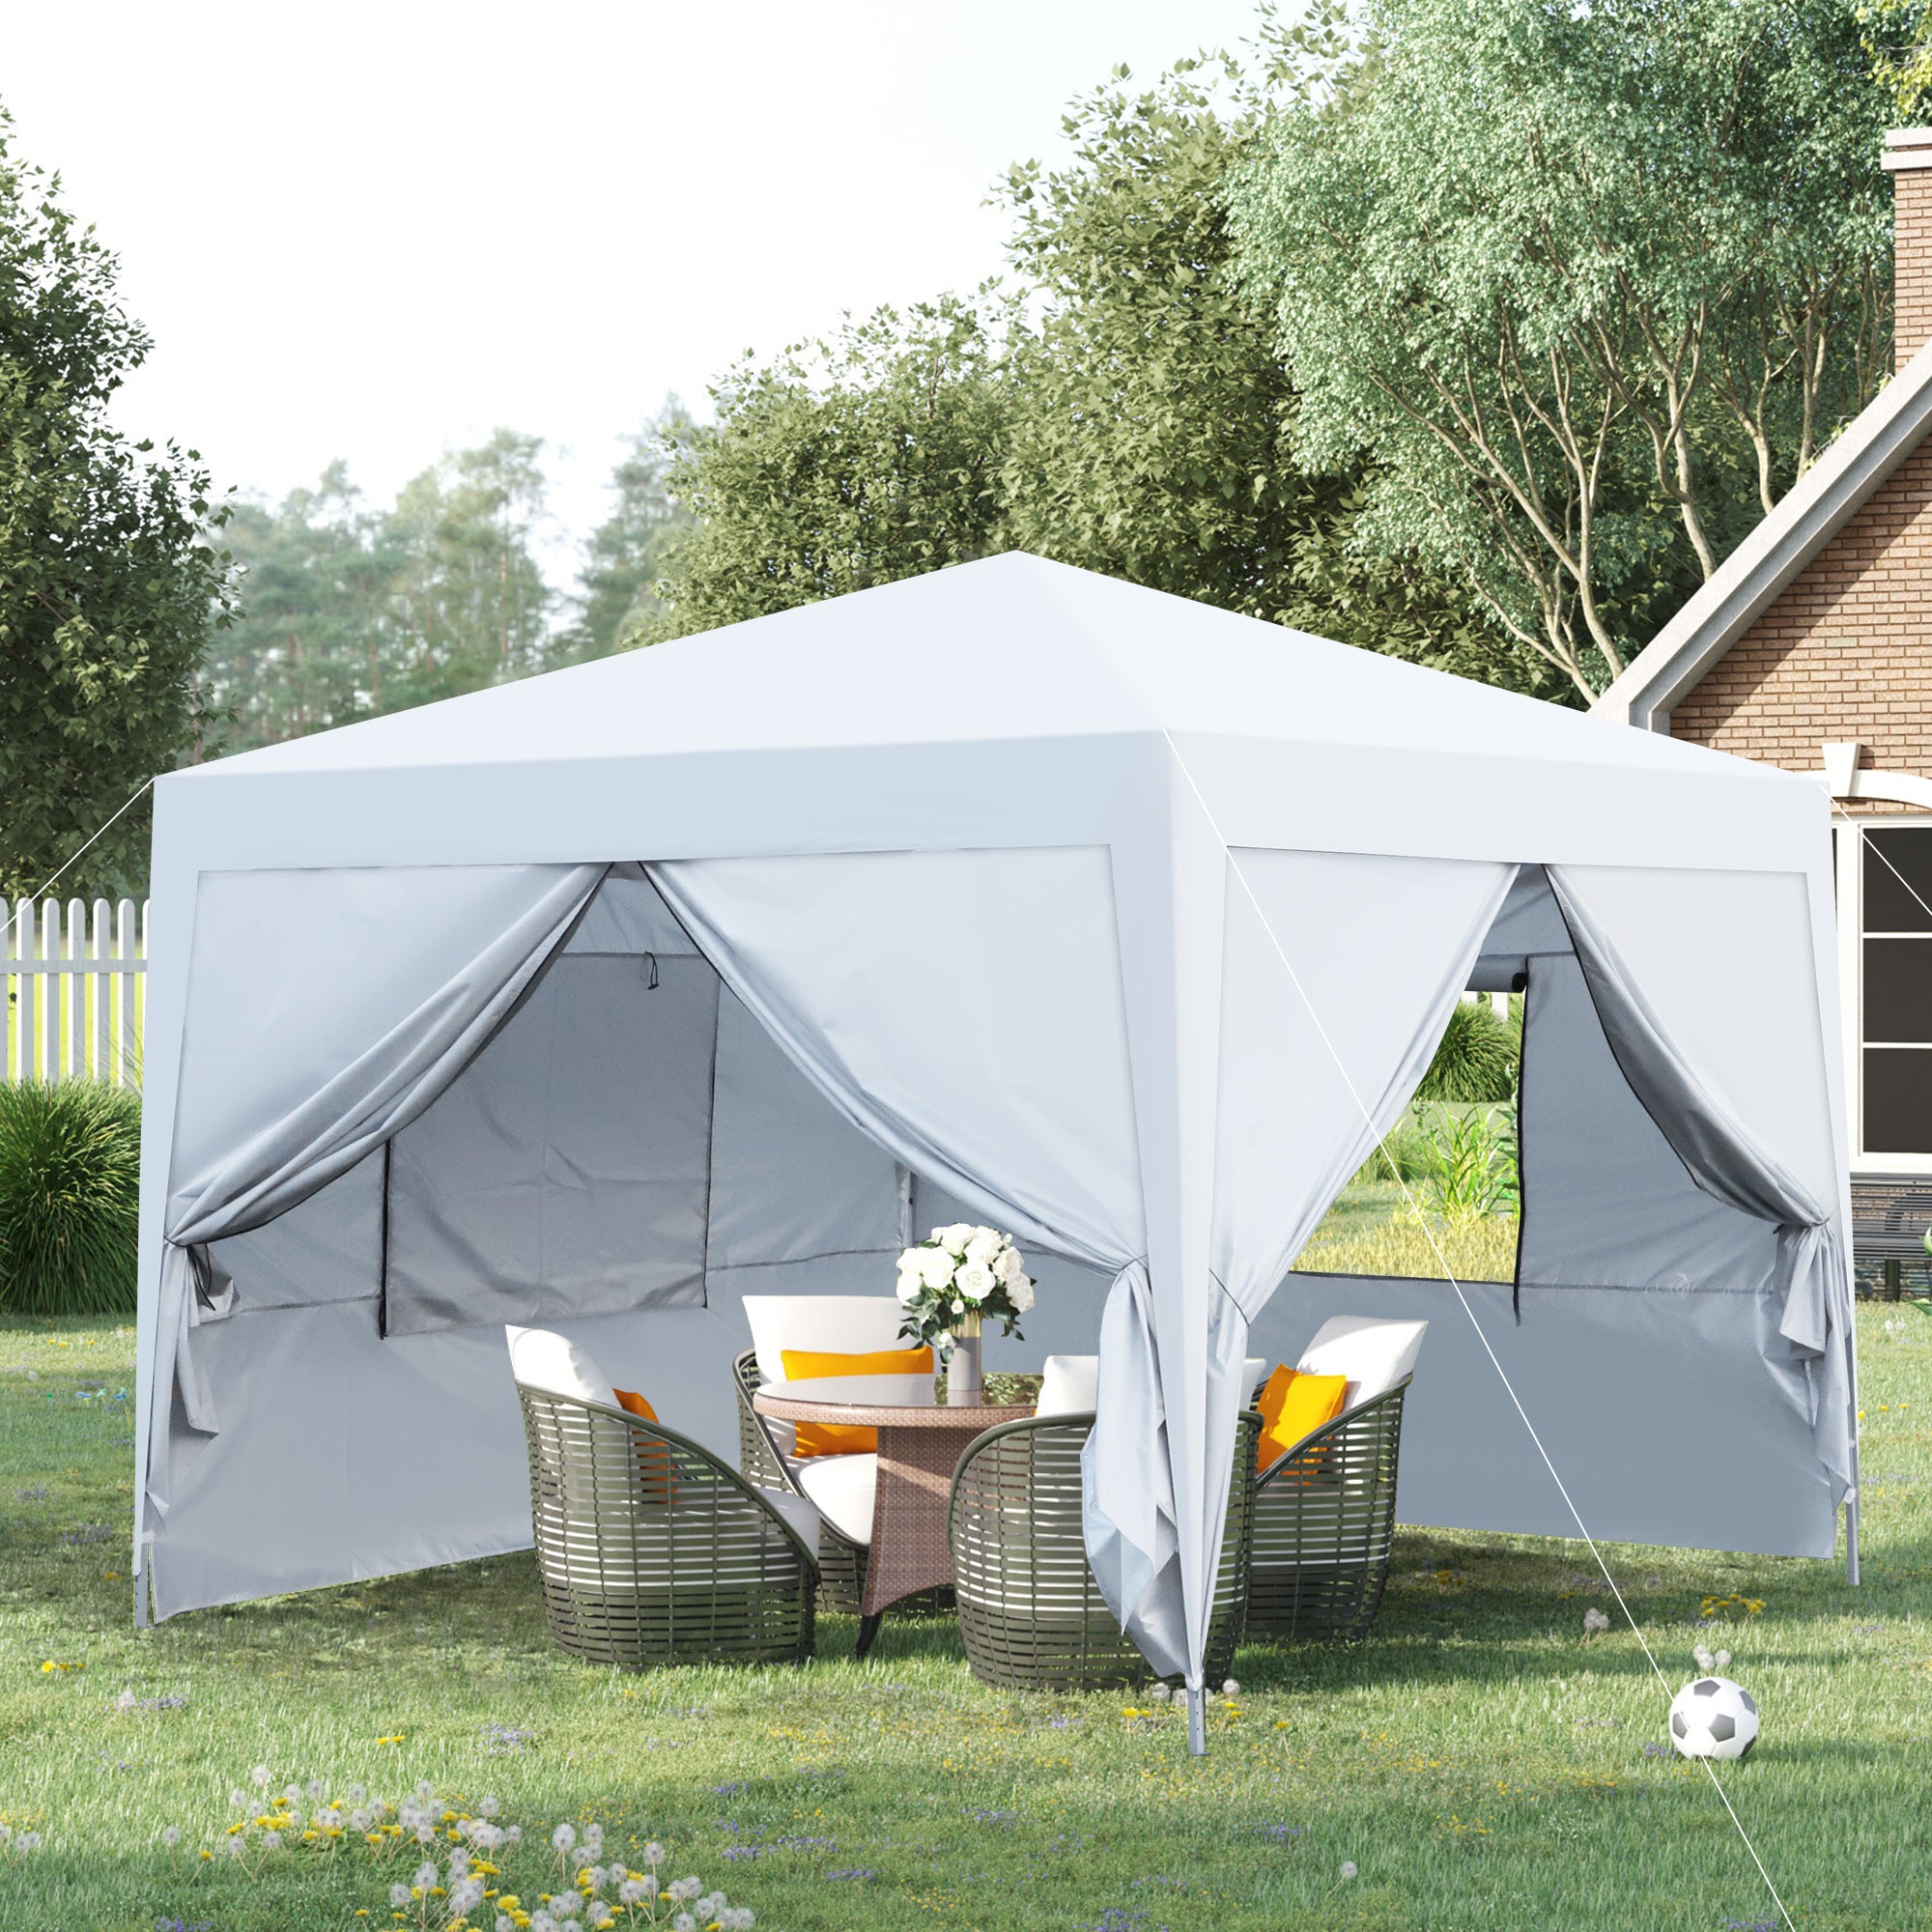 10x-10Ft-Pop-Up-Tent-with-Removable-Sidewall-Umbrellas-&-Sunshades